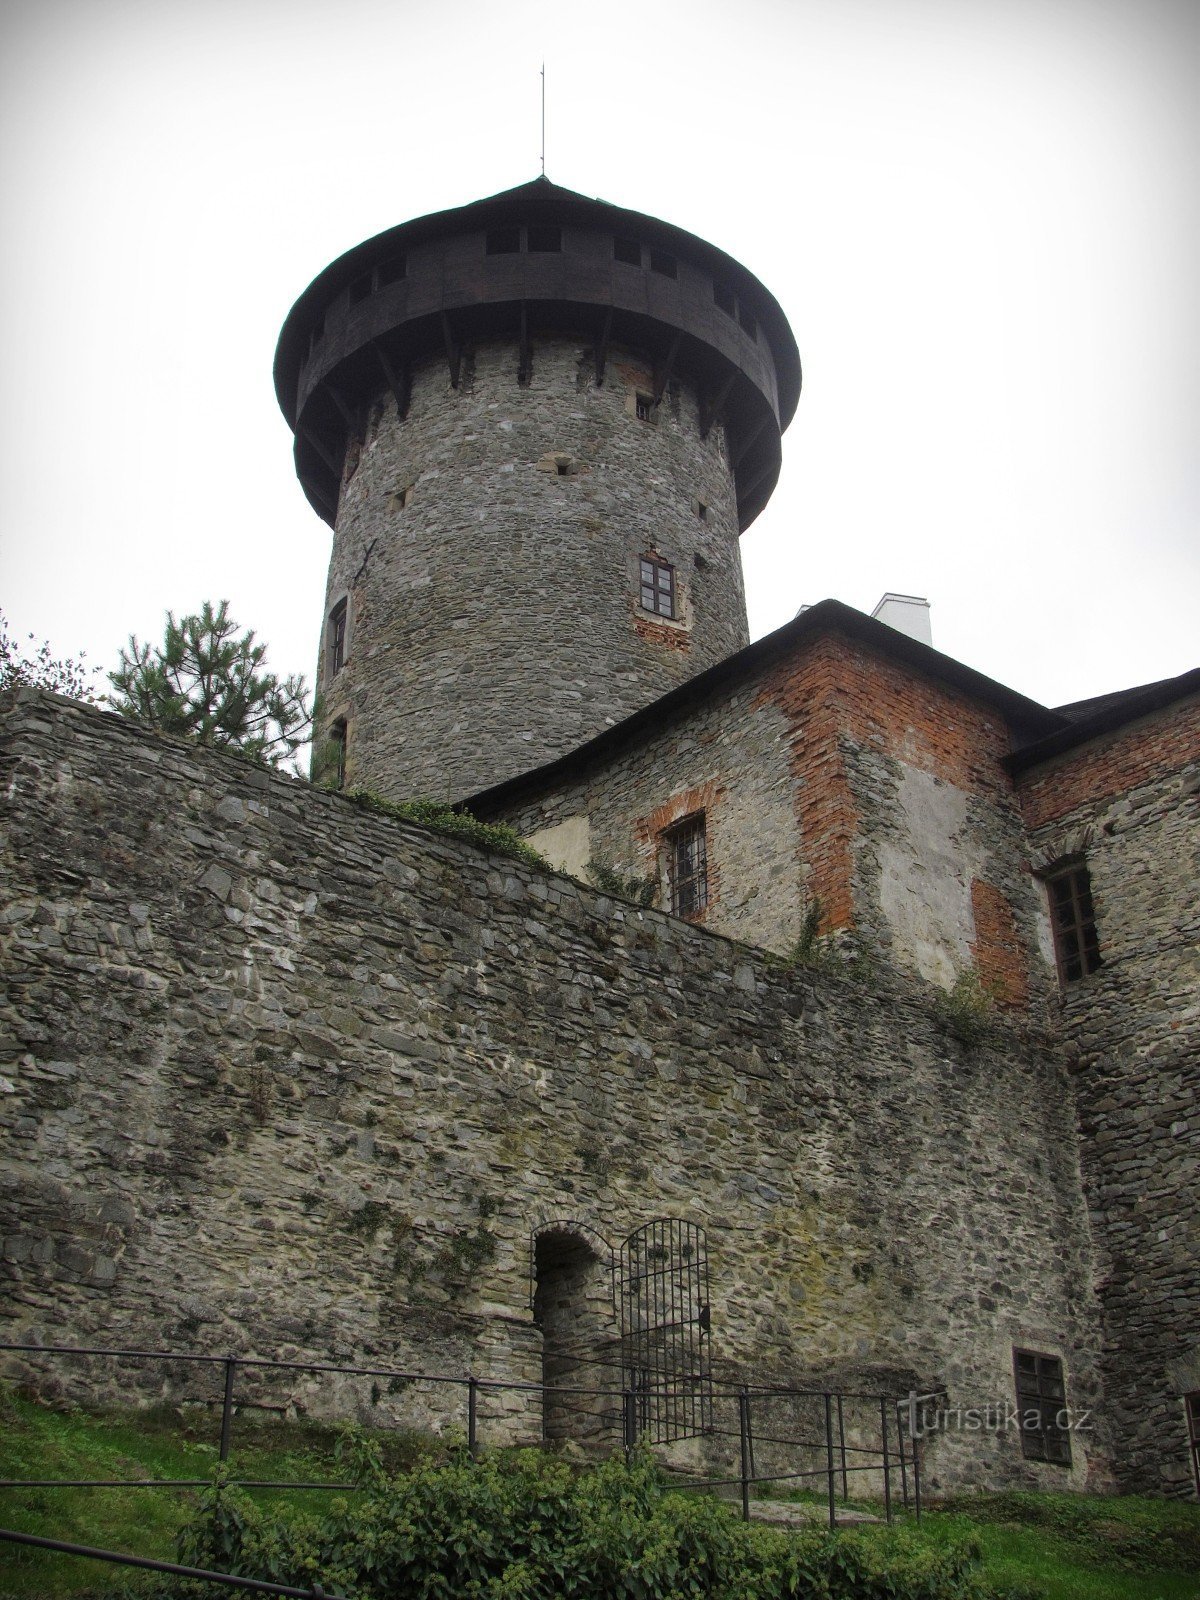 The main tower of the Sovinec castle